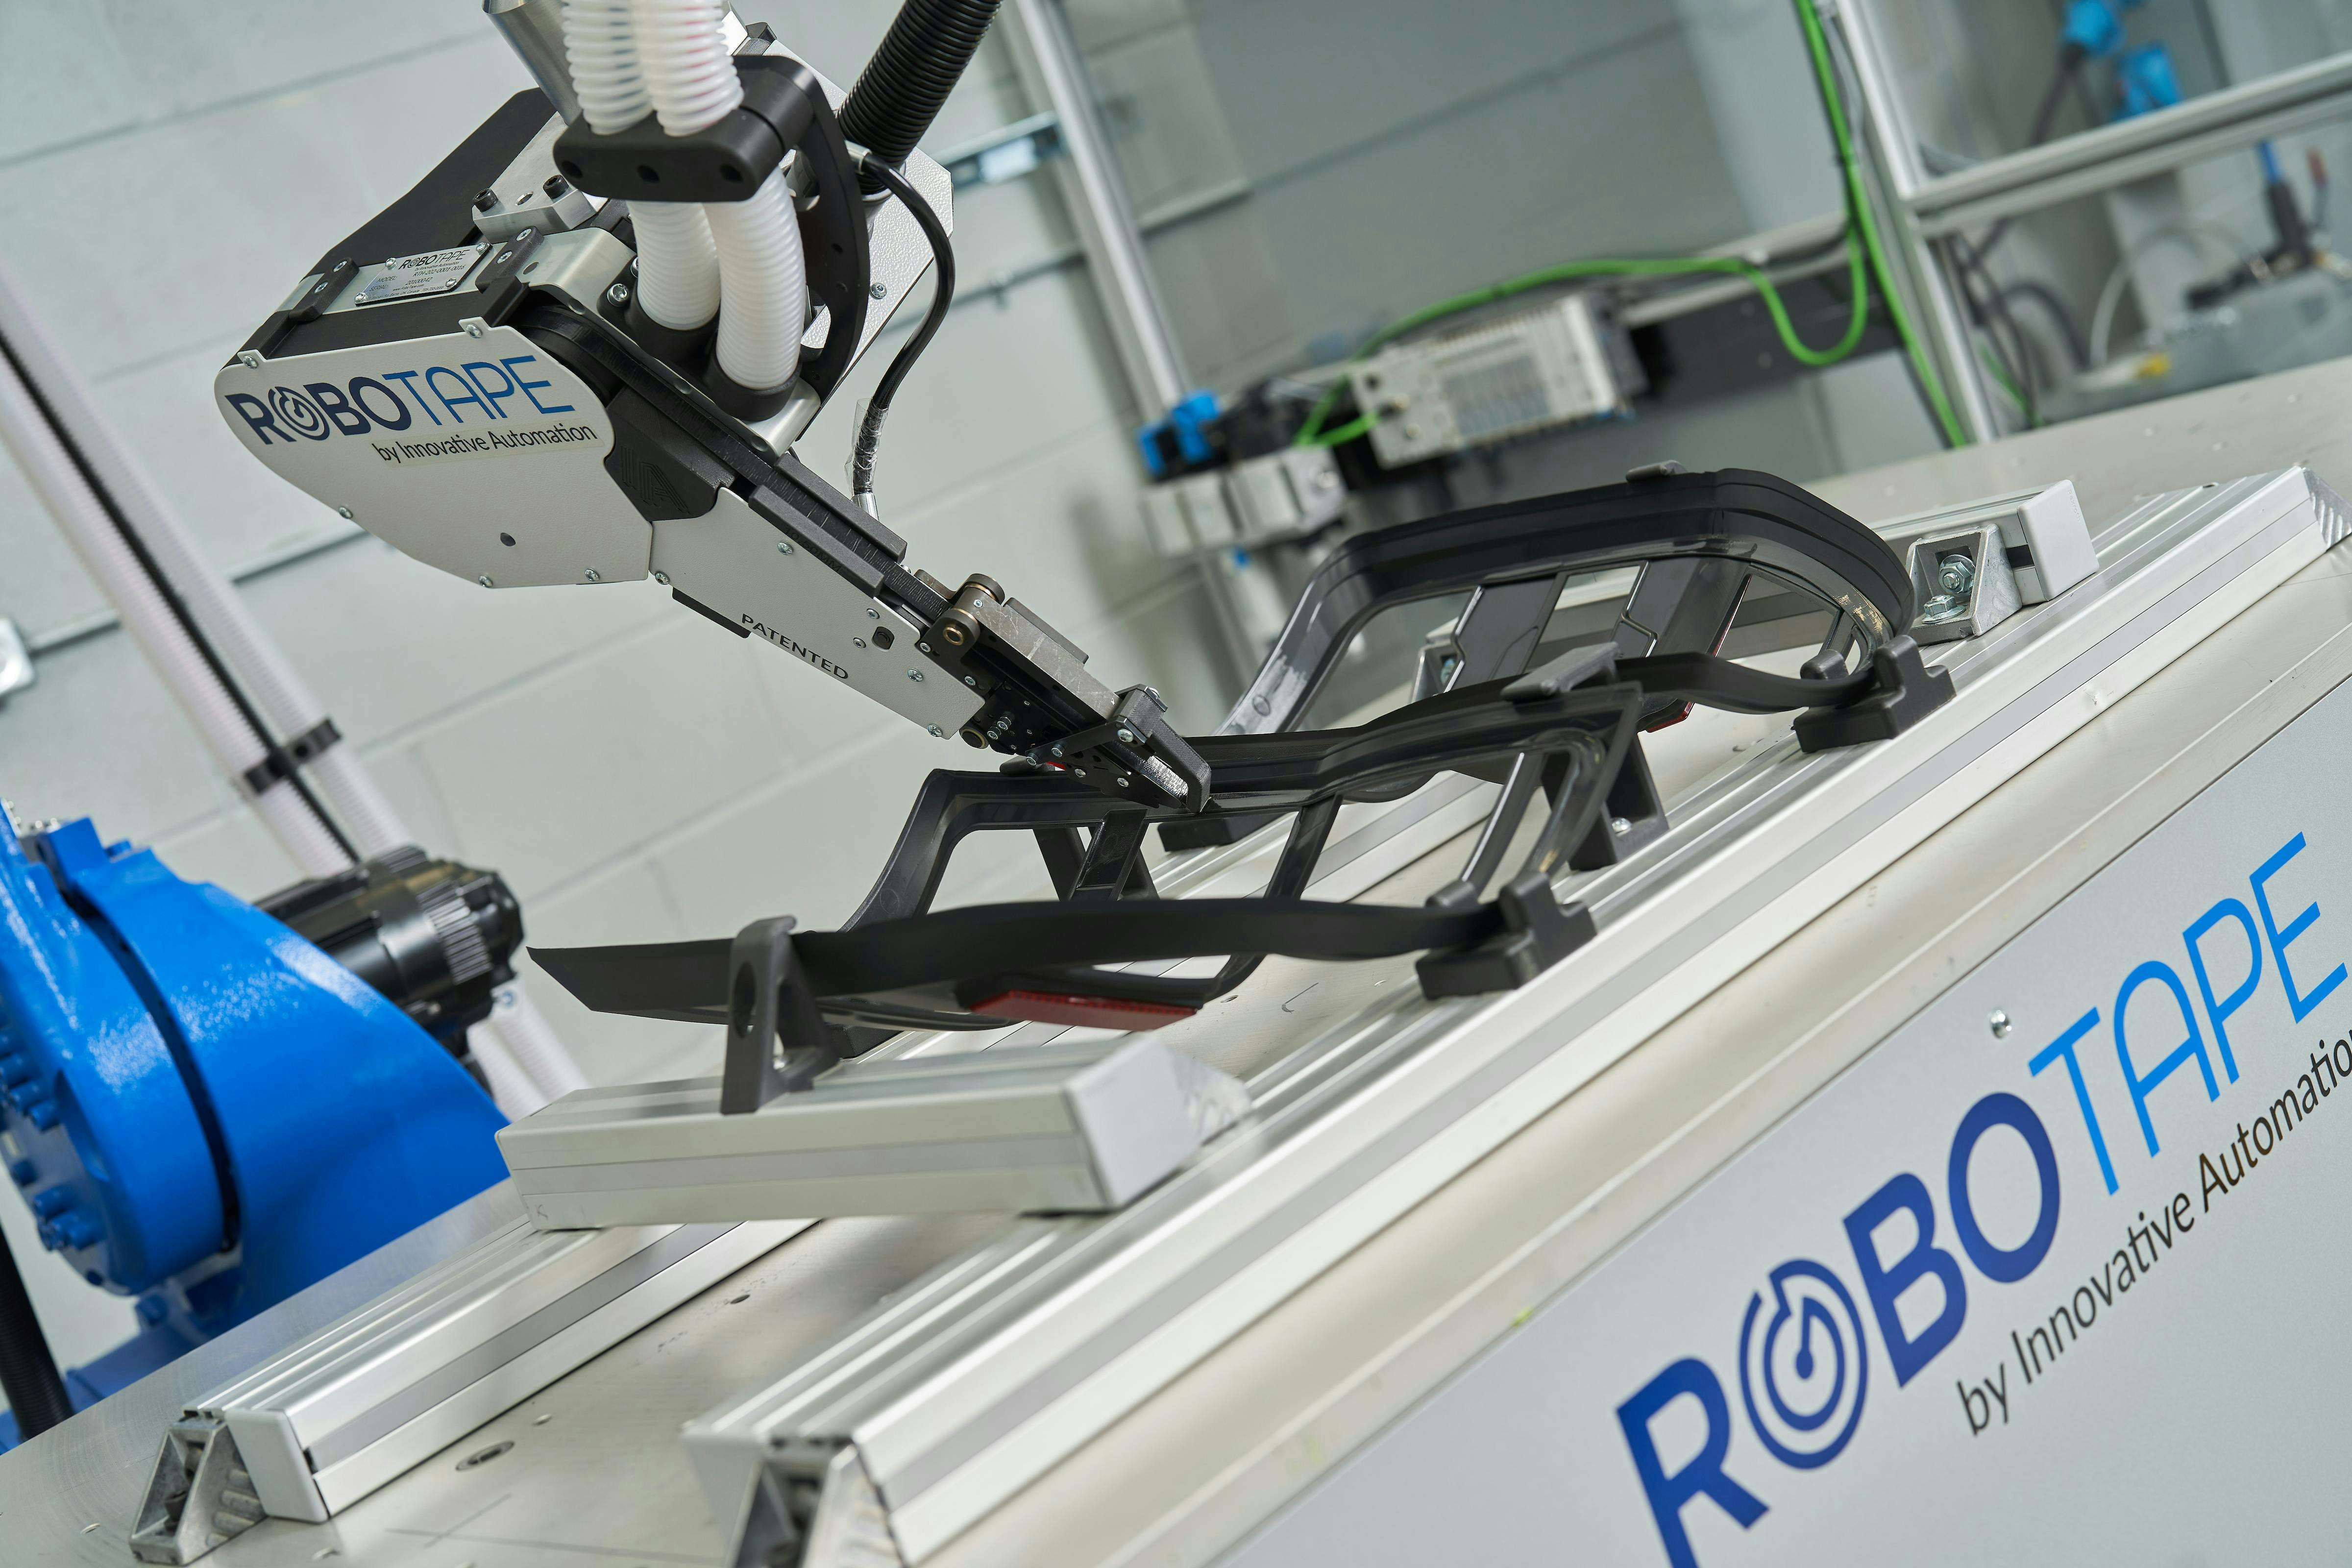 Figure 1: The RoboTape system offers a scalable, automated solution for applying industrial adhesive tapes.